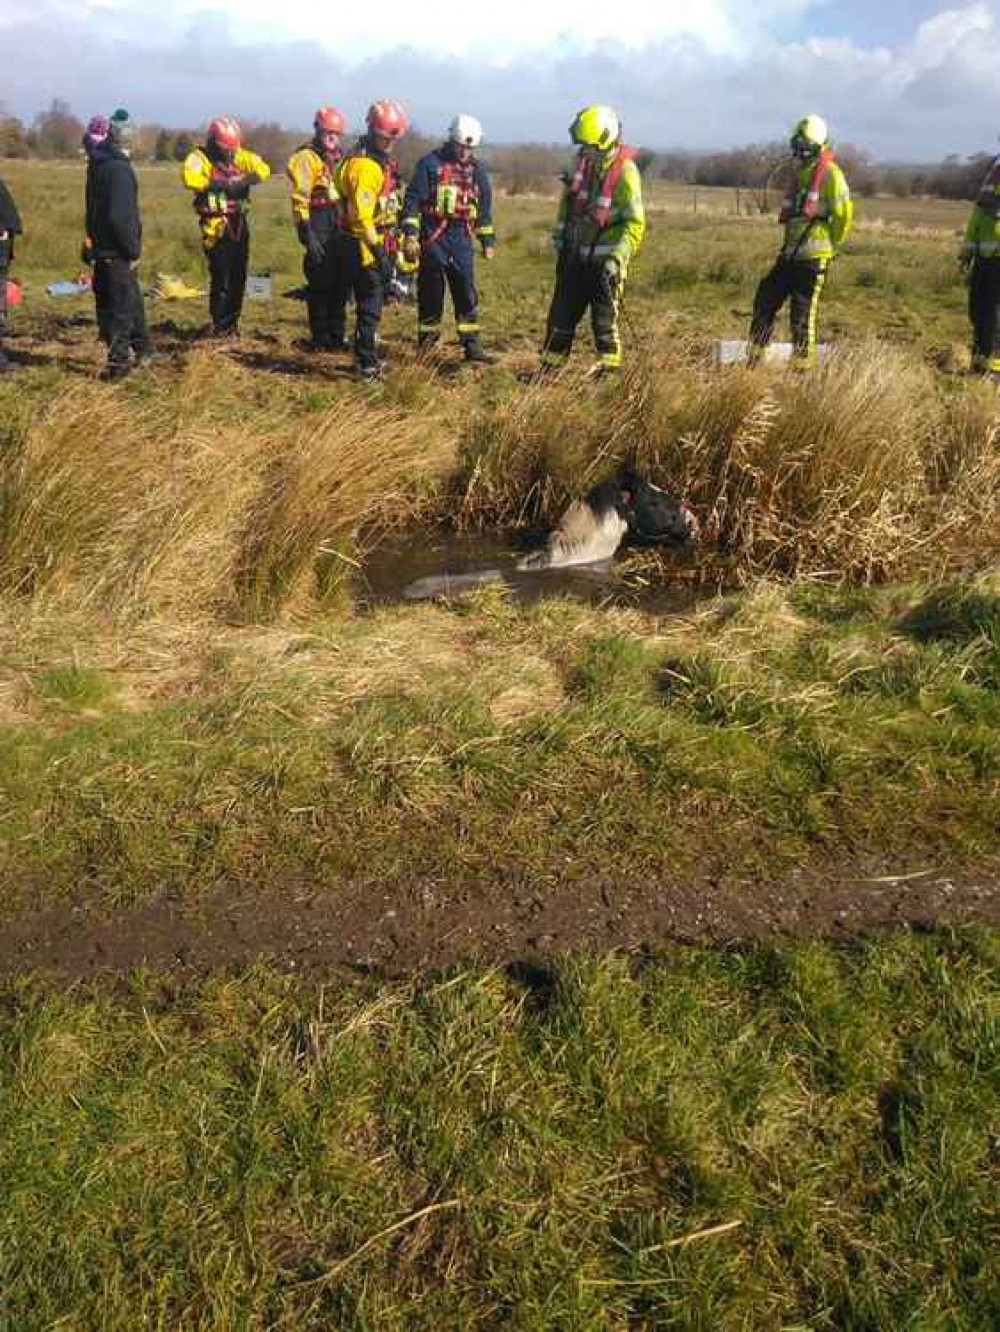 The photo posted on the fire service of the crew working out how best to free the horse